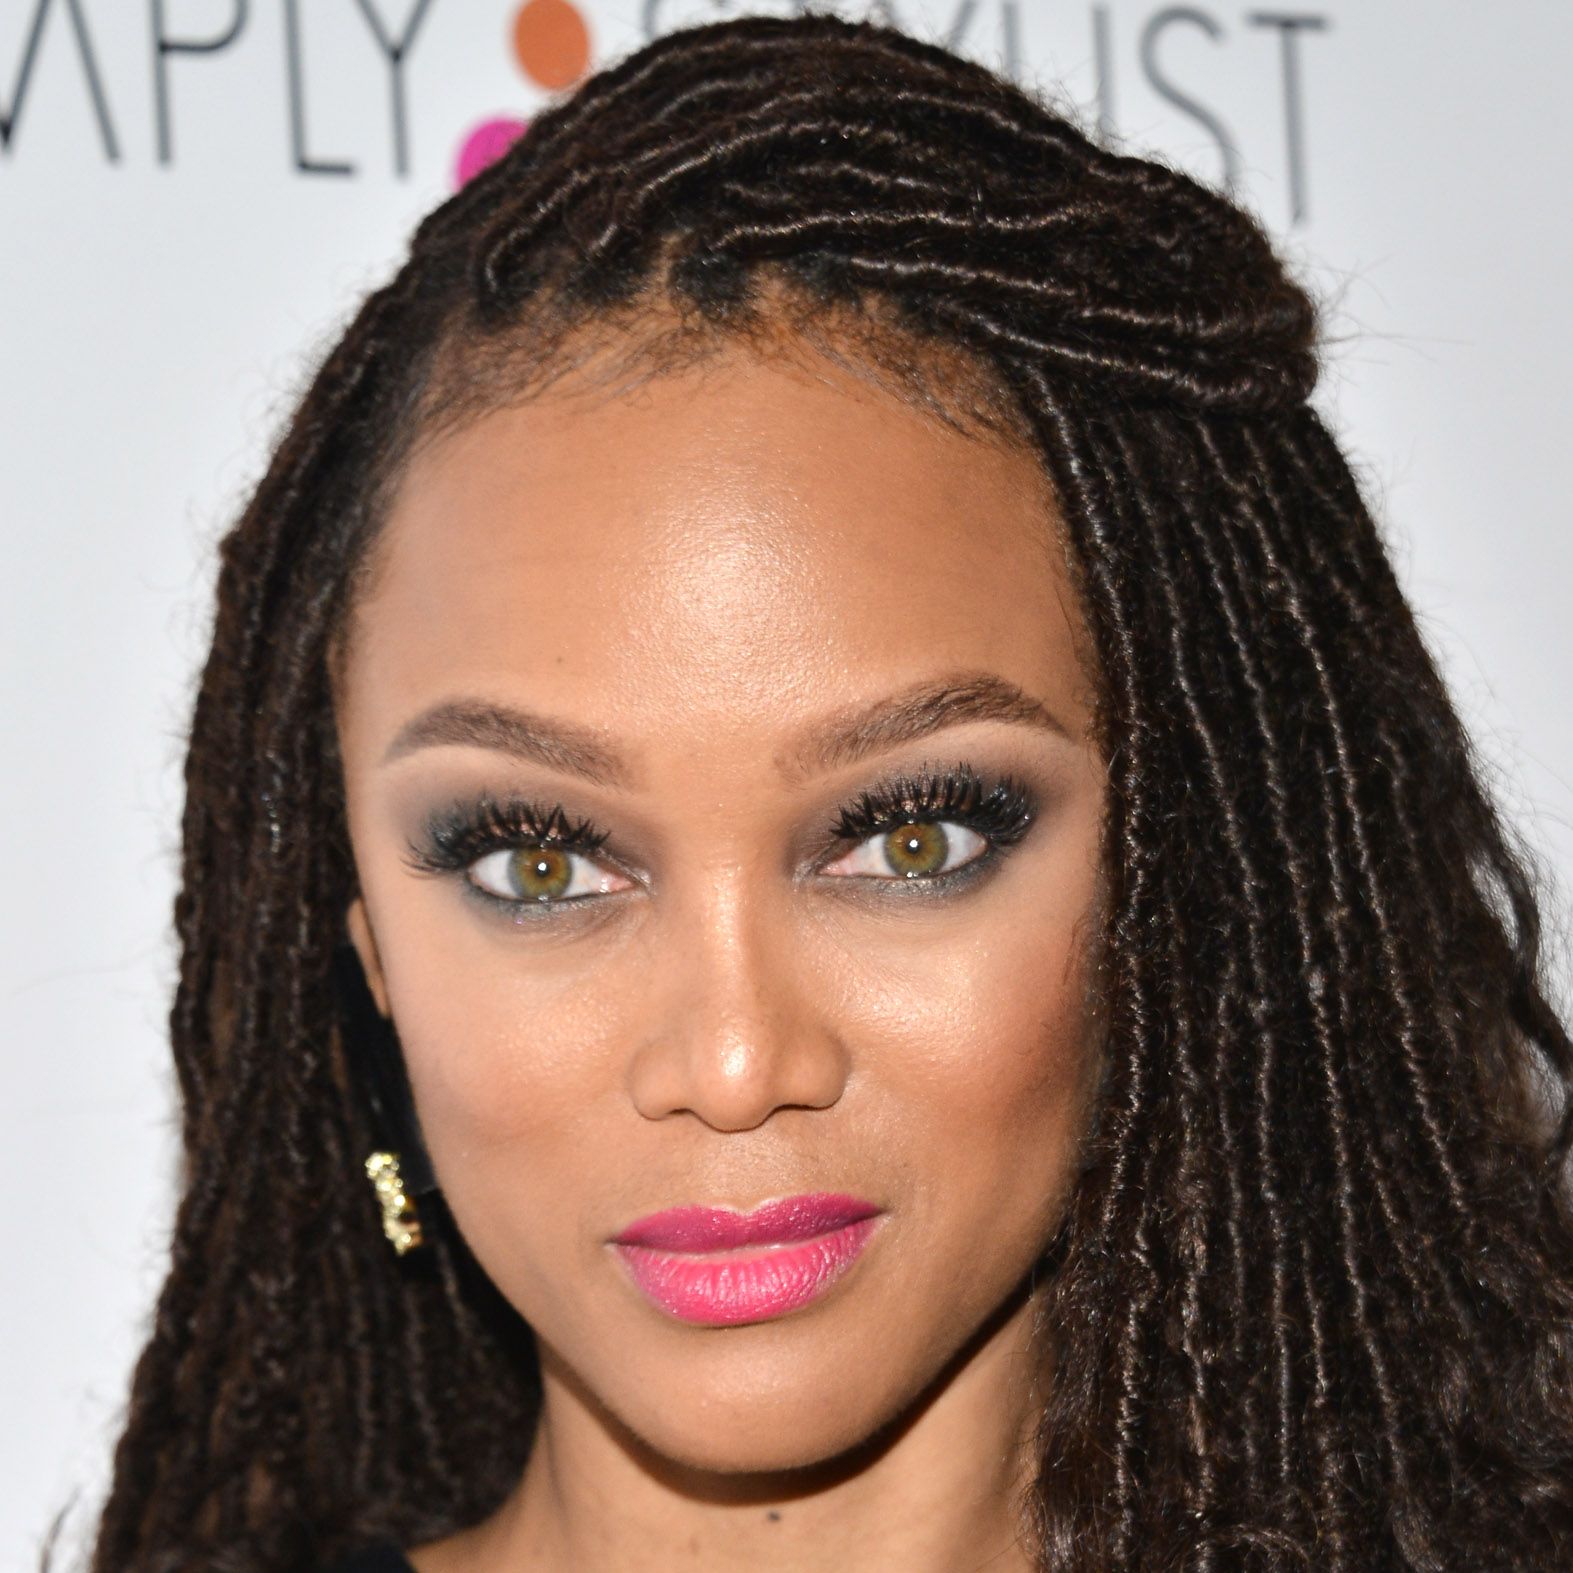 Tyra Banks has a new name to go with her modeling comeback